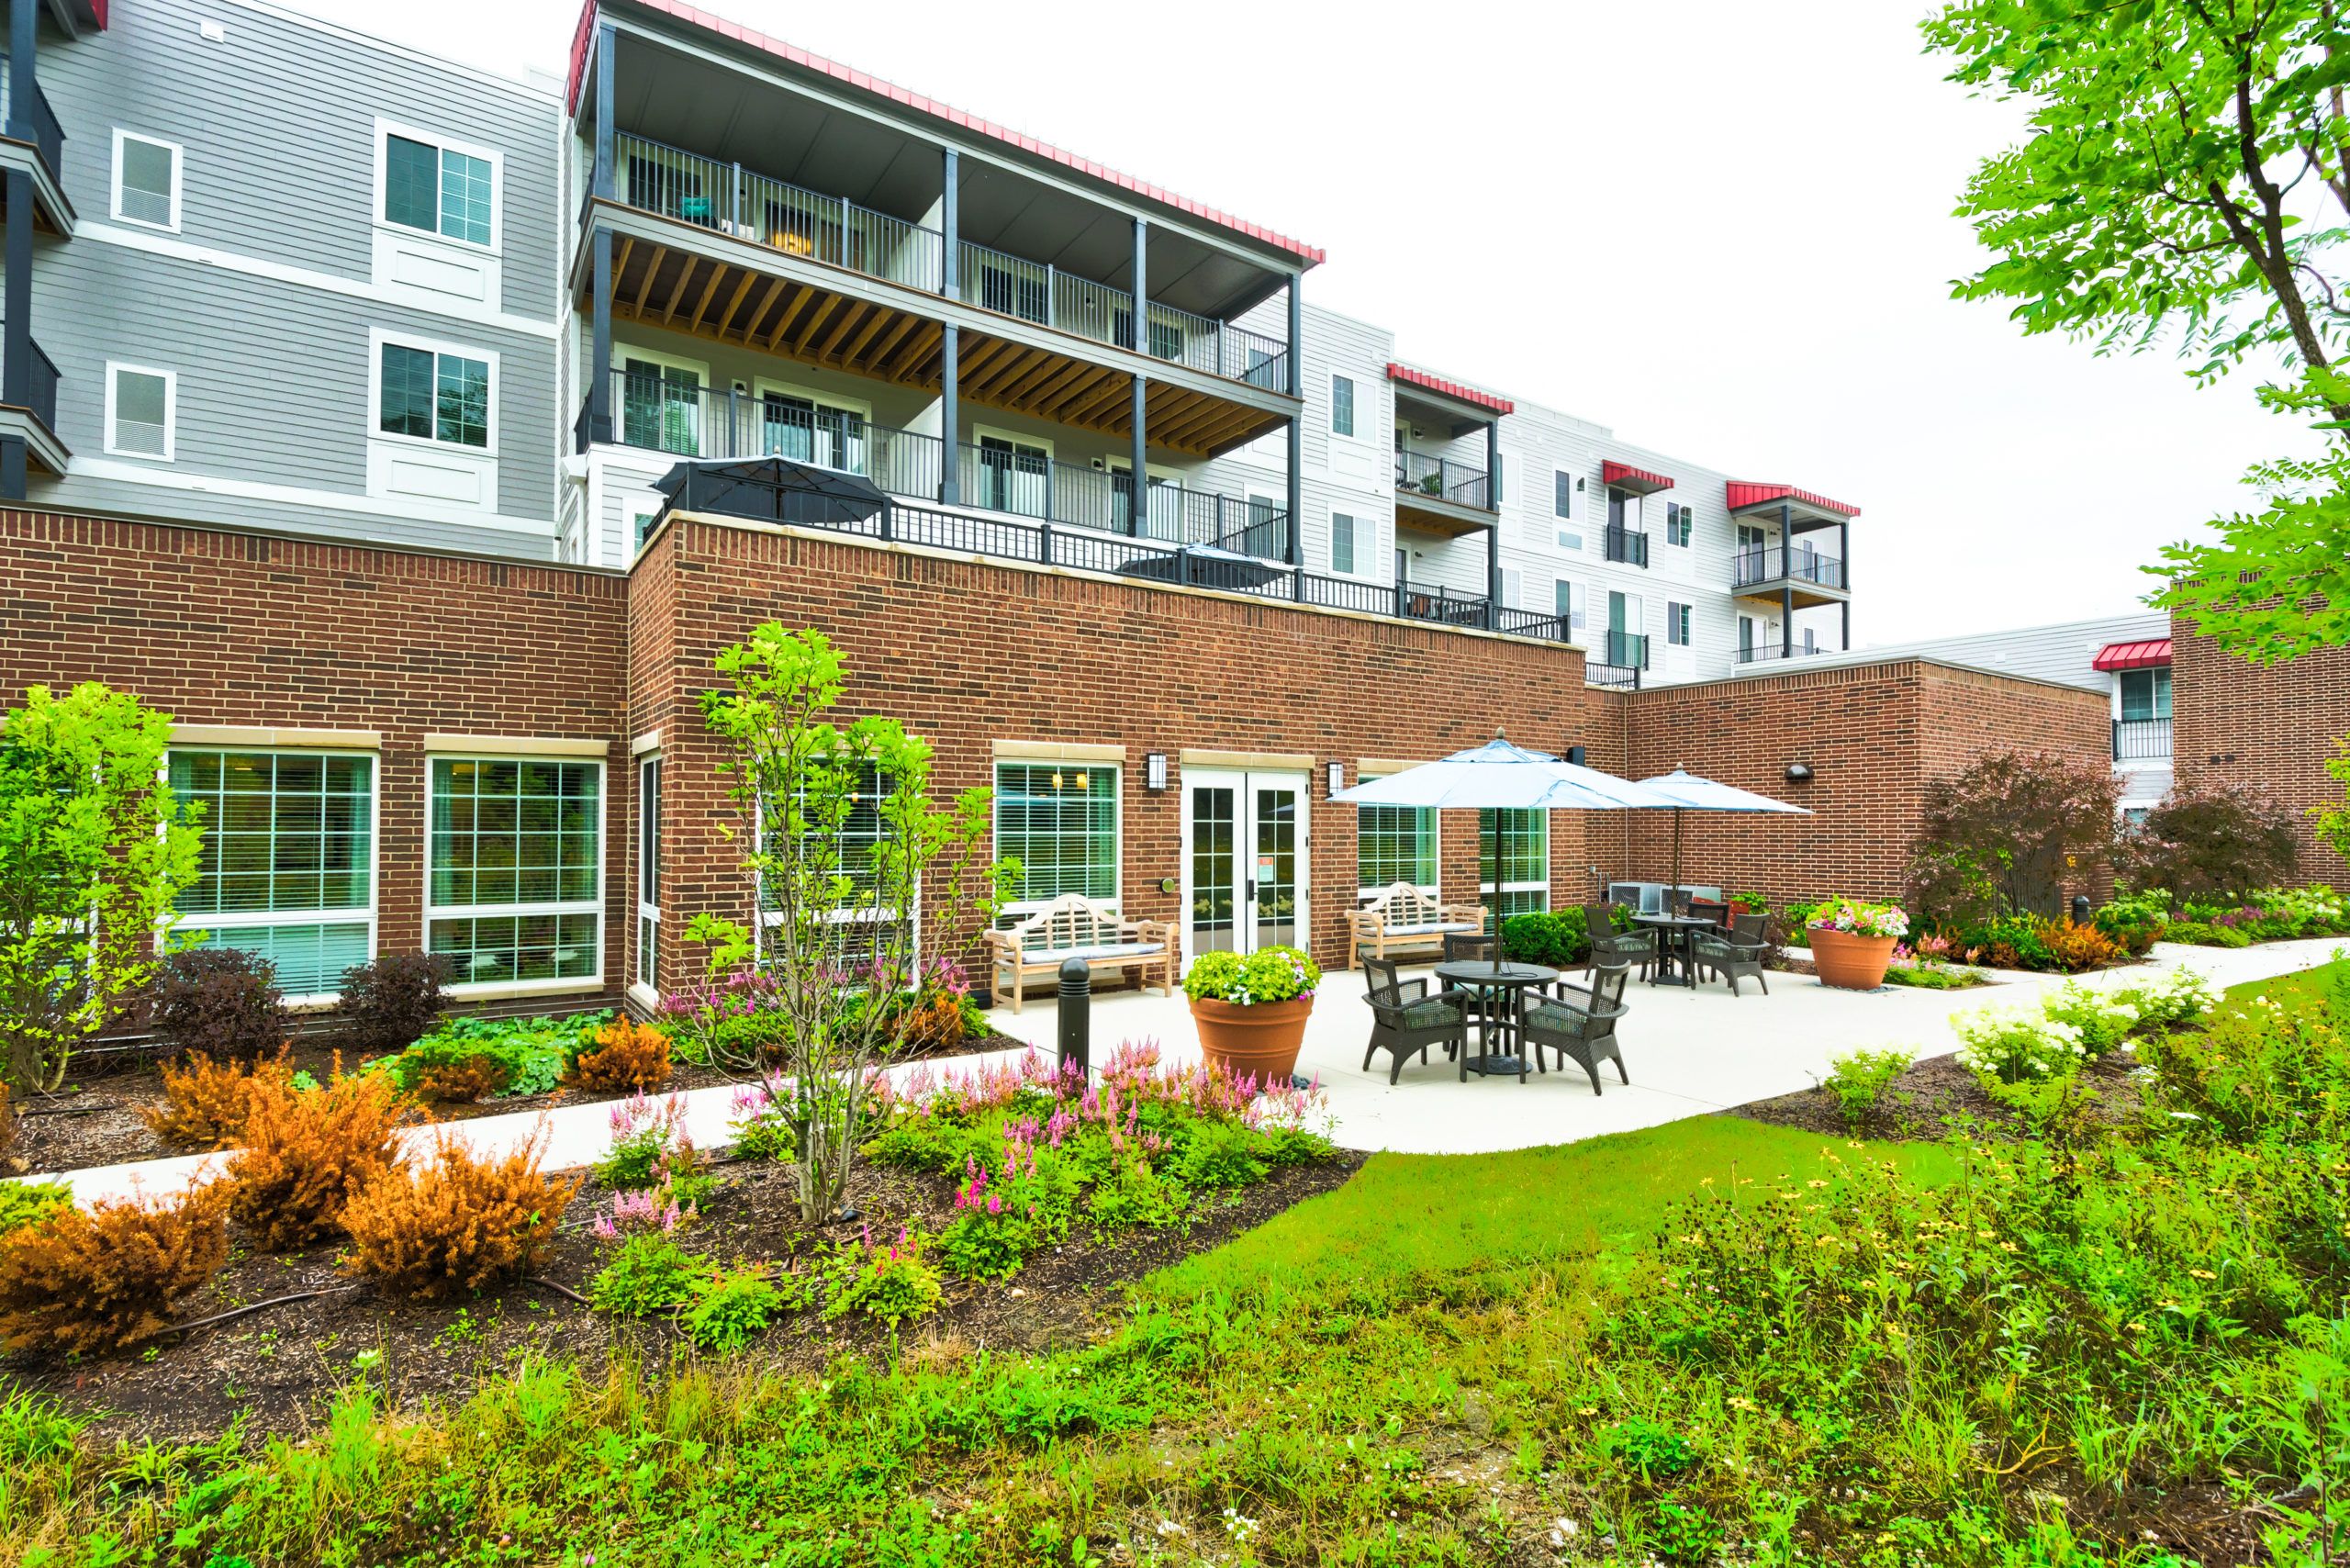 Senior living community in Palos Heights with high-rise apartments, outdoor benches, and lush greenery.